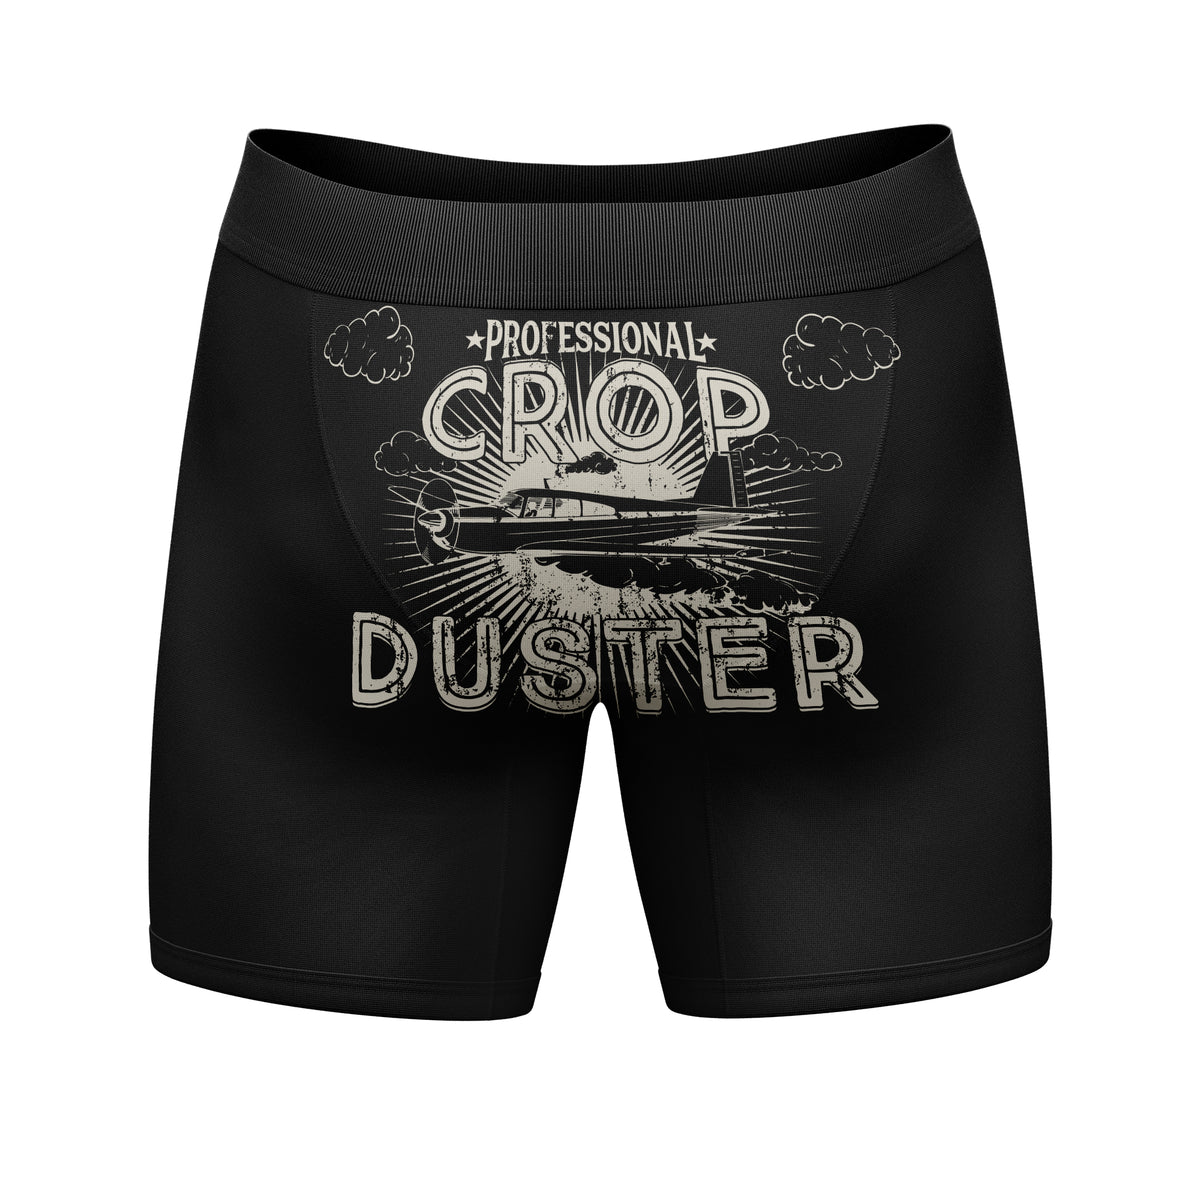 Funny Black Professional Crop Duster Nerdy Toilet Tee